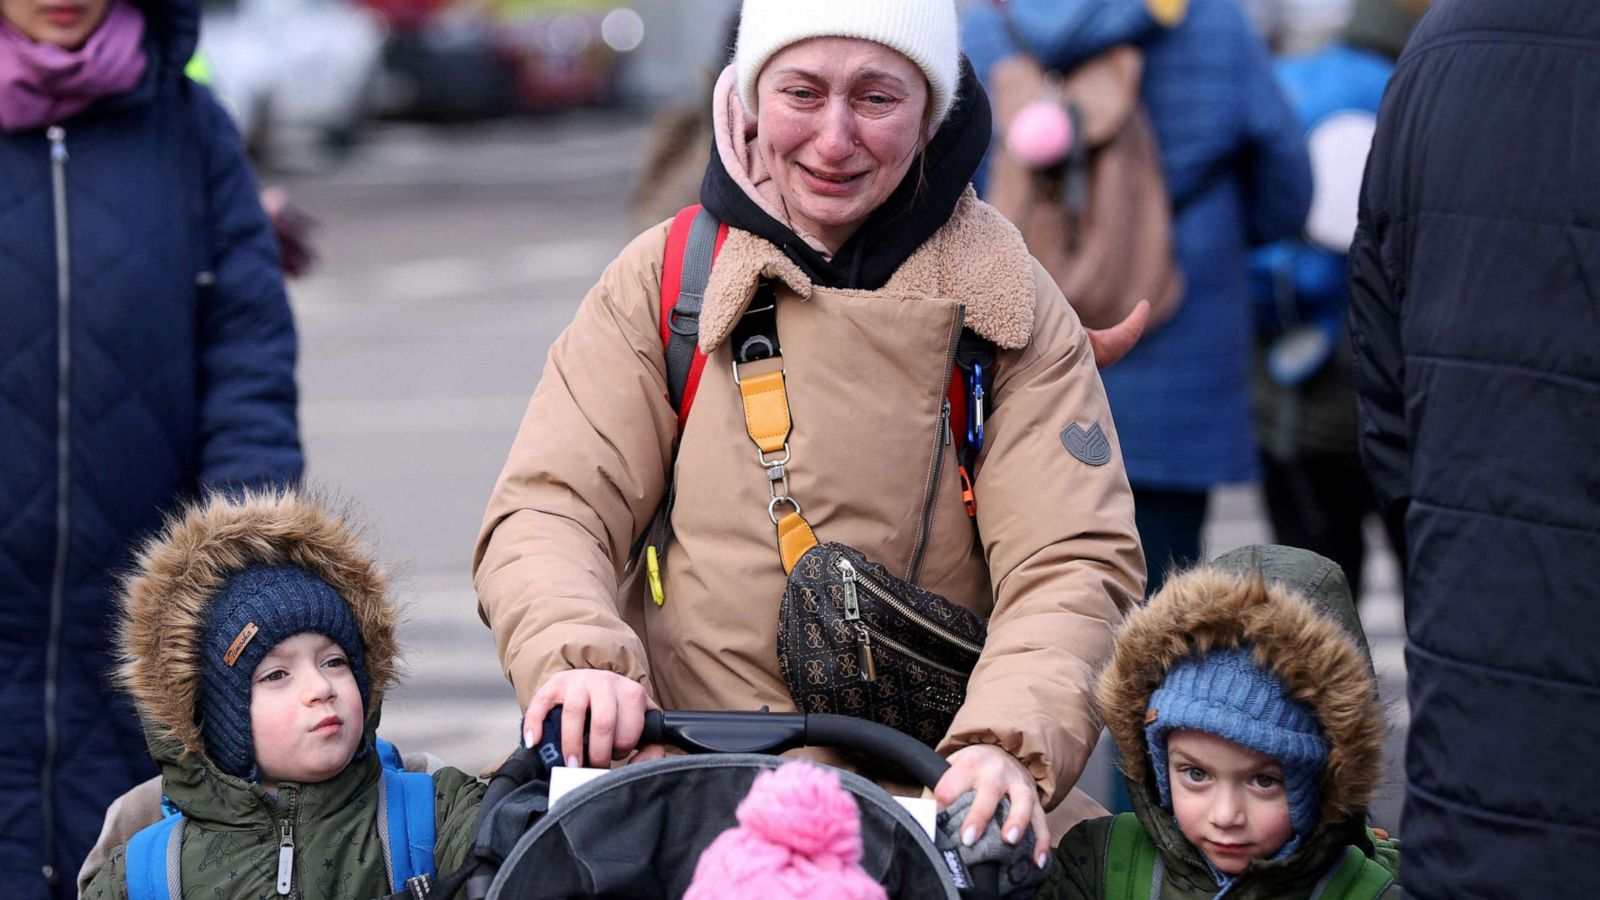 Make it more difficult for Ukrainian Refugees to obtain help